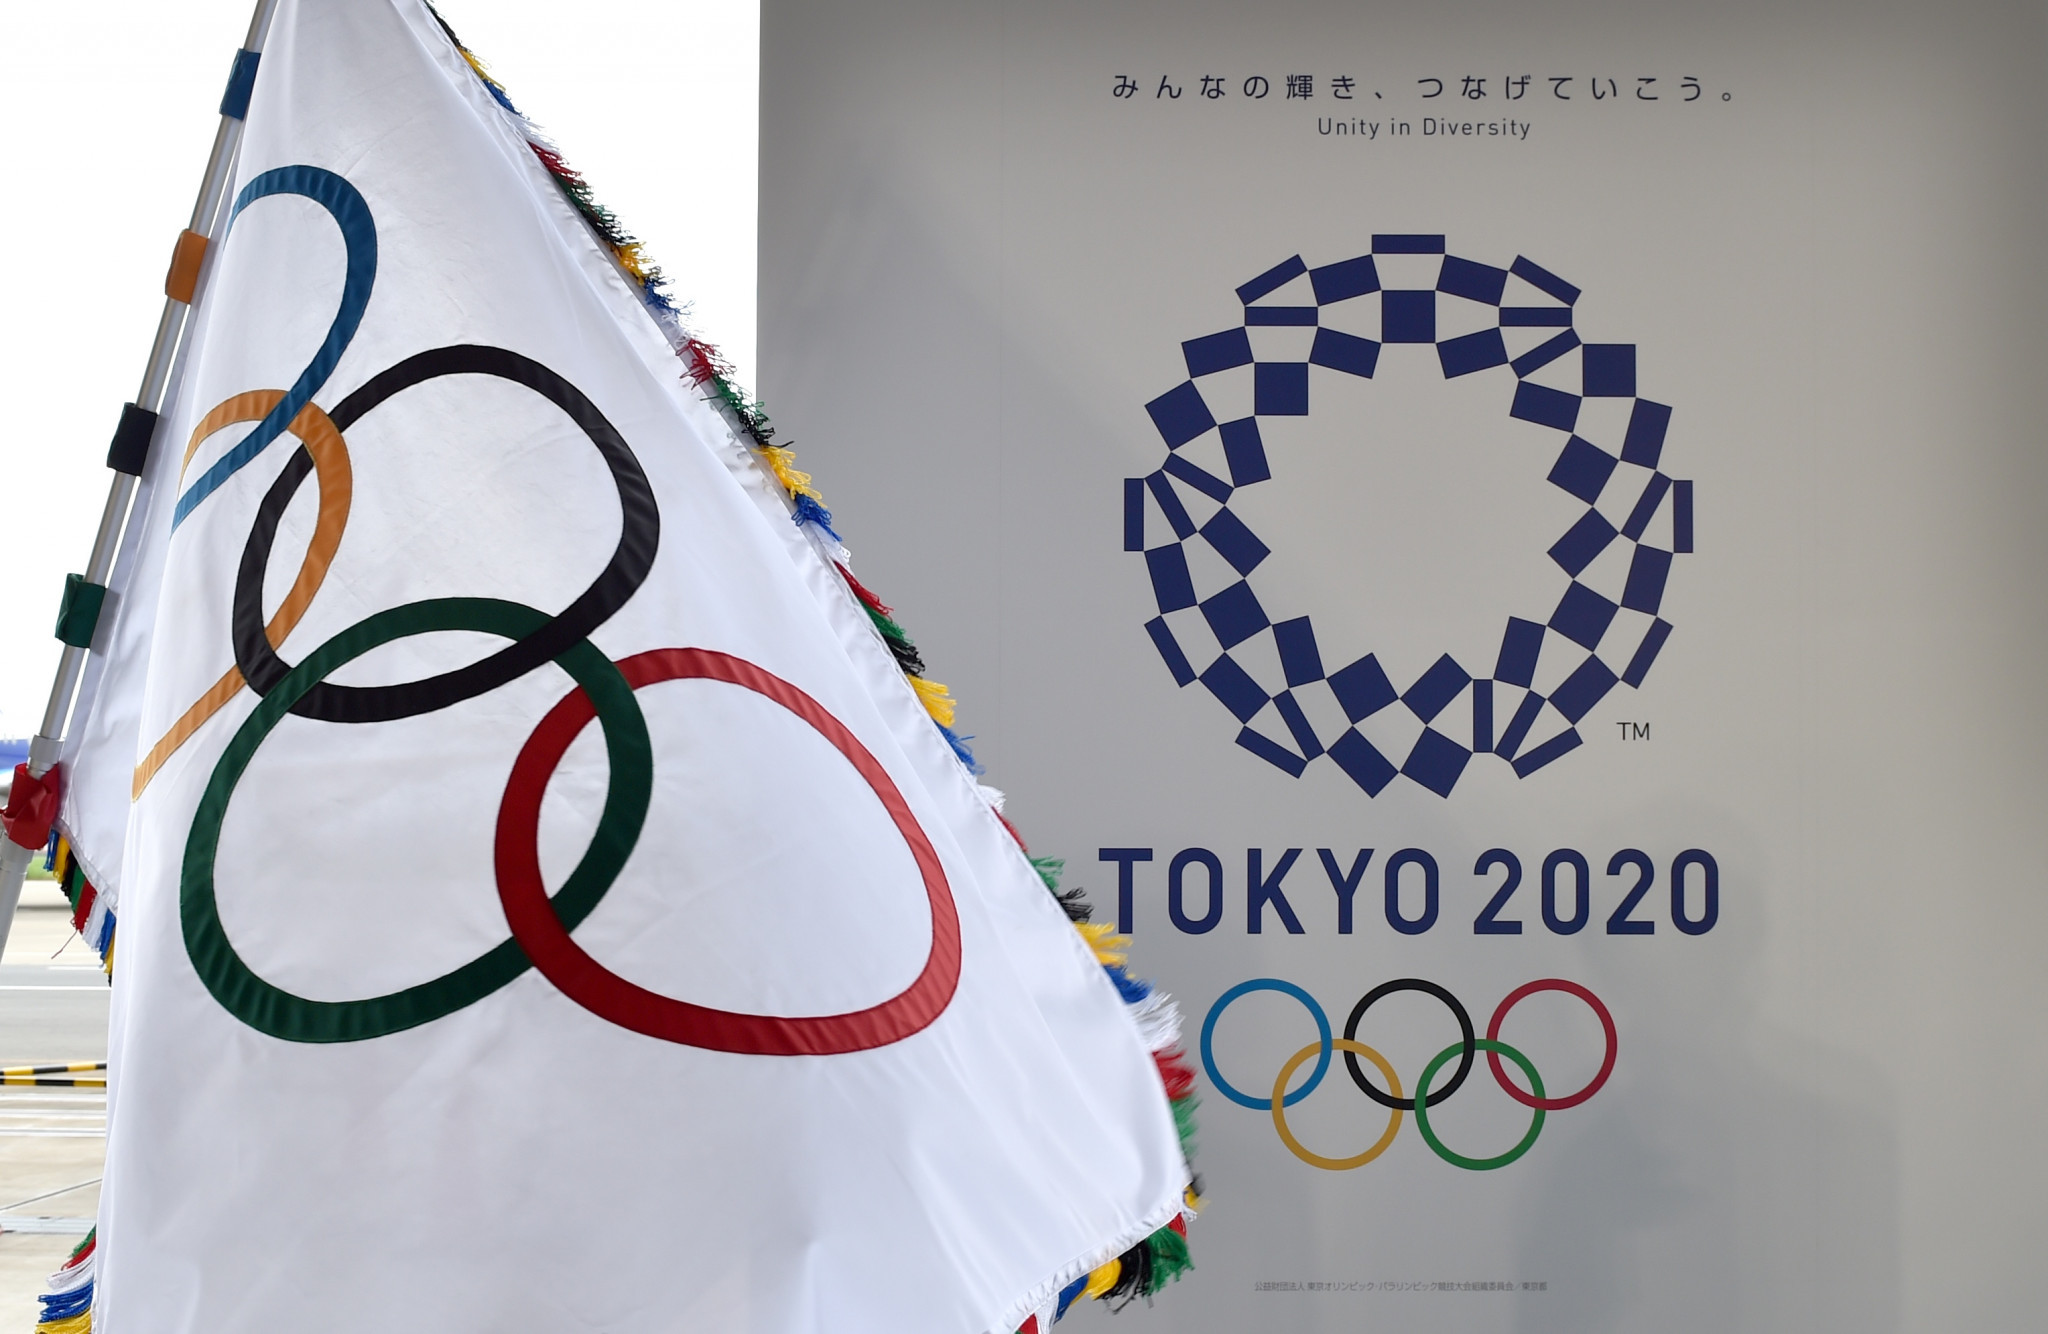 Qualification system for Tokyo 2020 Olympics published by IAAF